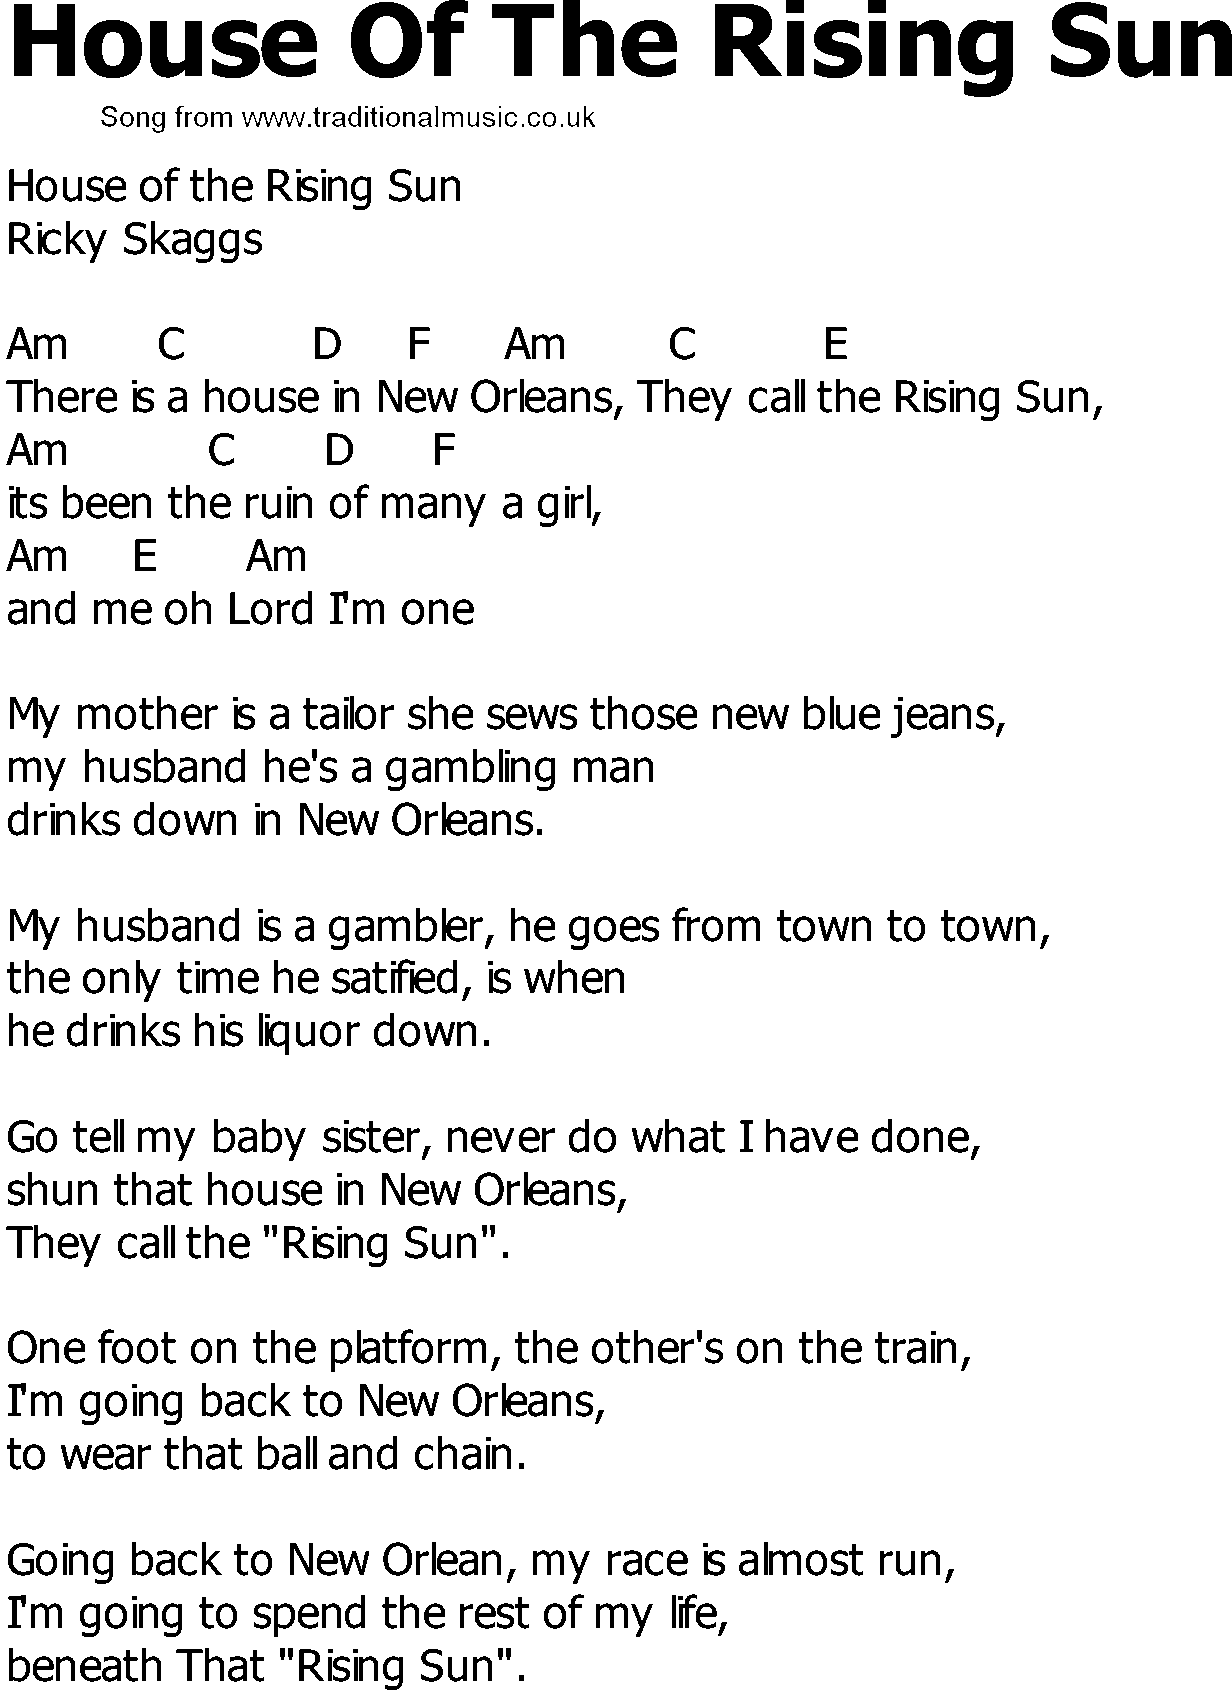 Old Country song lyrics with chords - House Of The Rising Sun